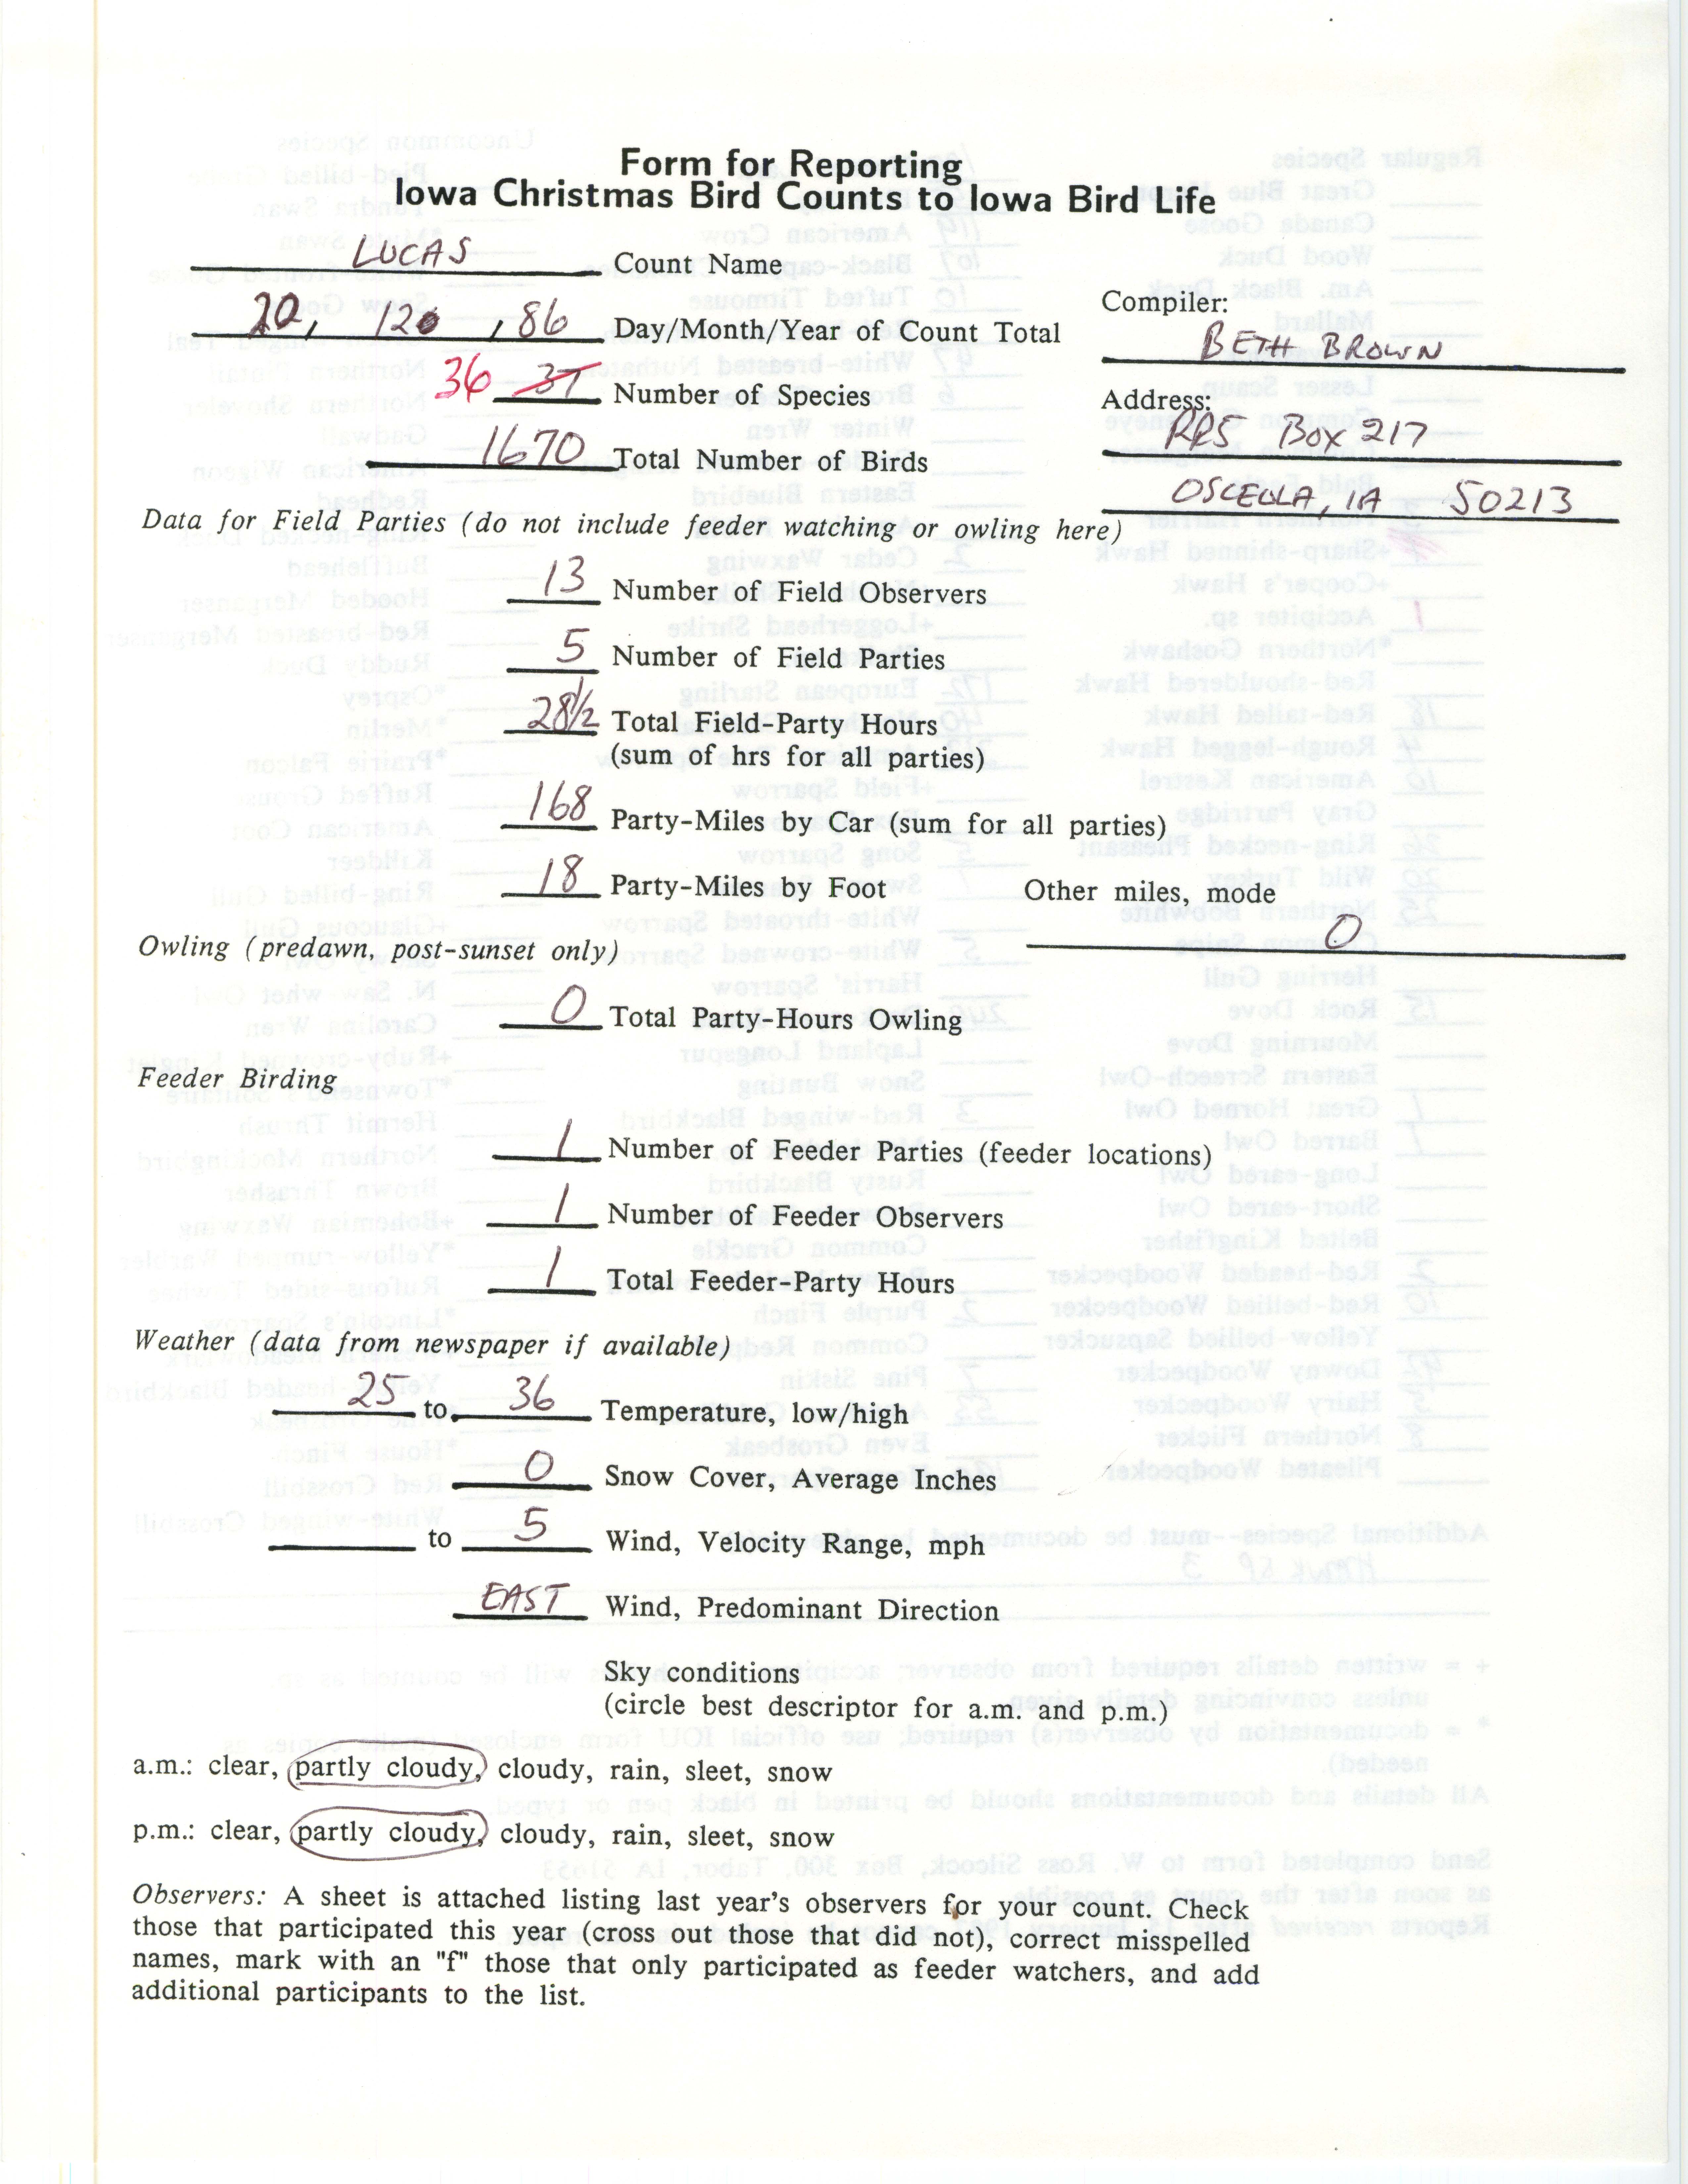 Form for reporting Iowa Christmas bird counts to Iowa Bird Life, Beth Brown, December 20, 1986